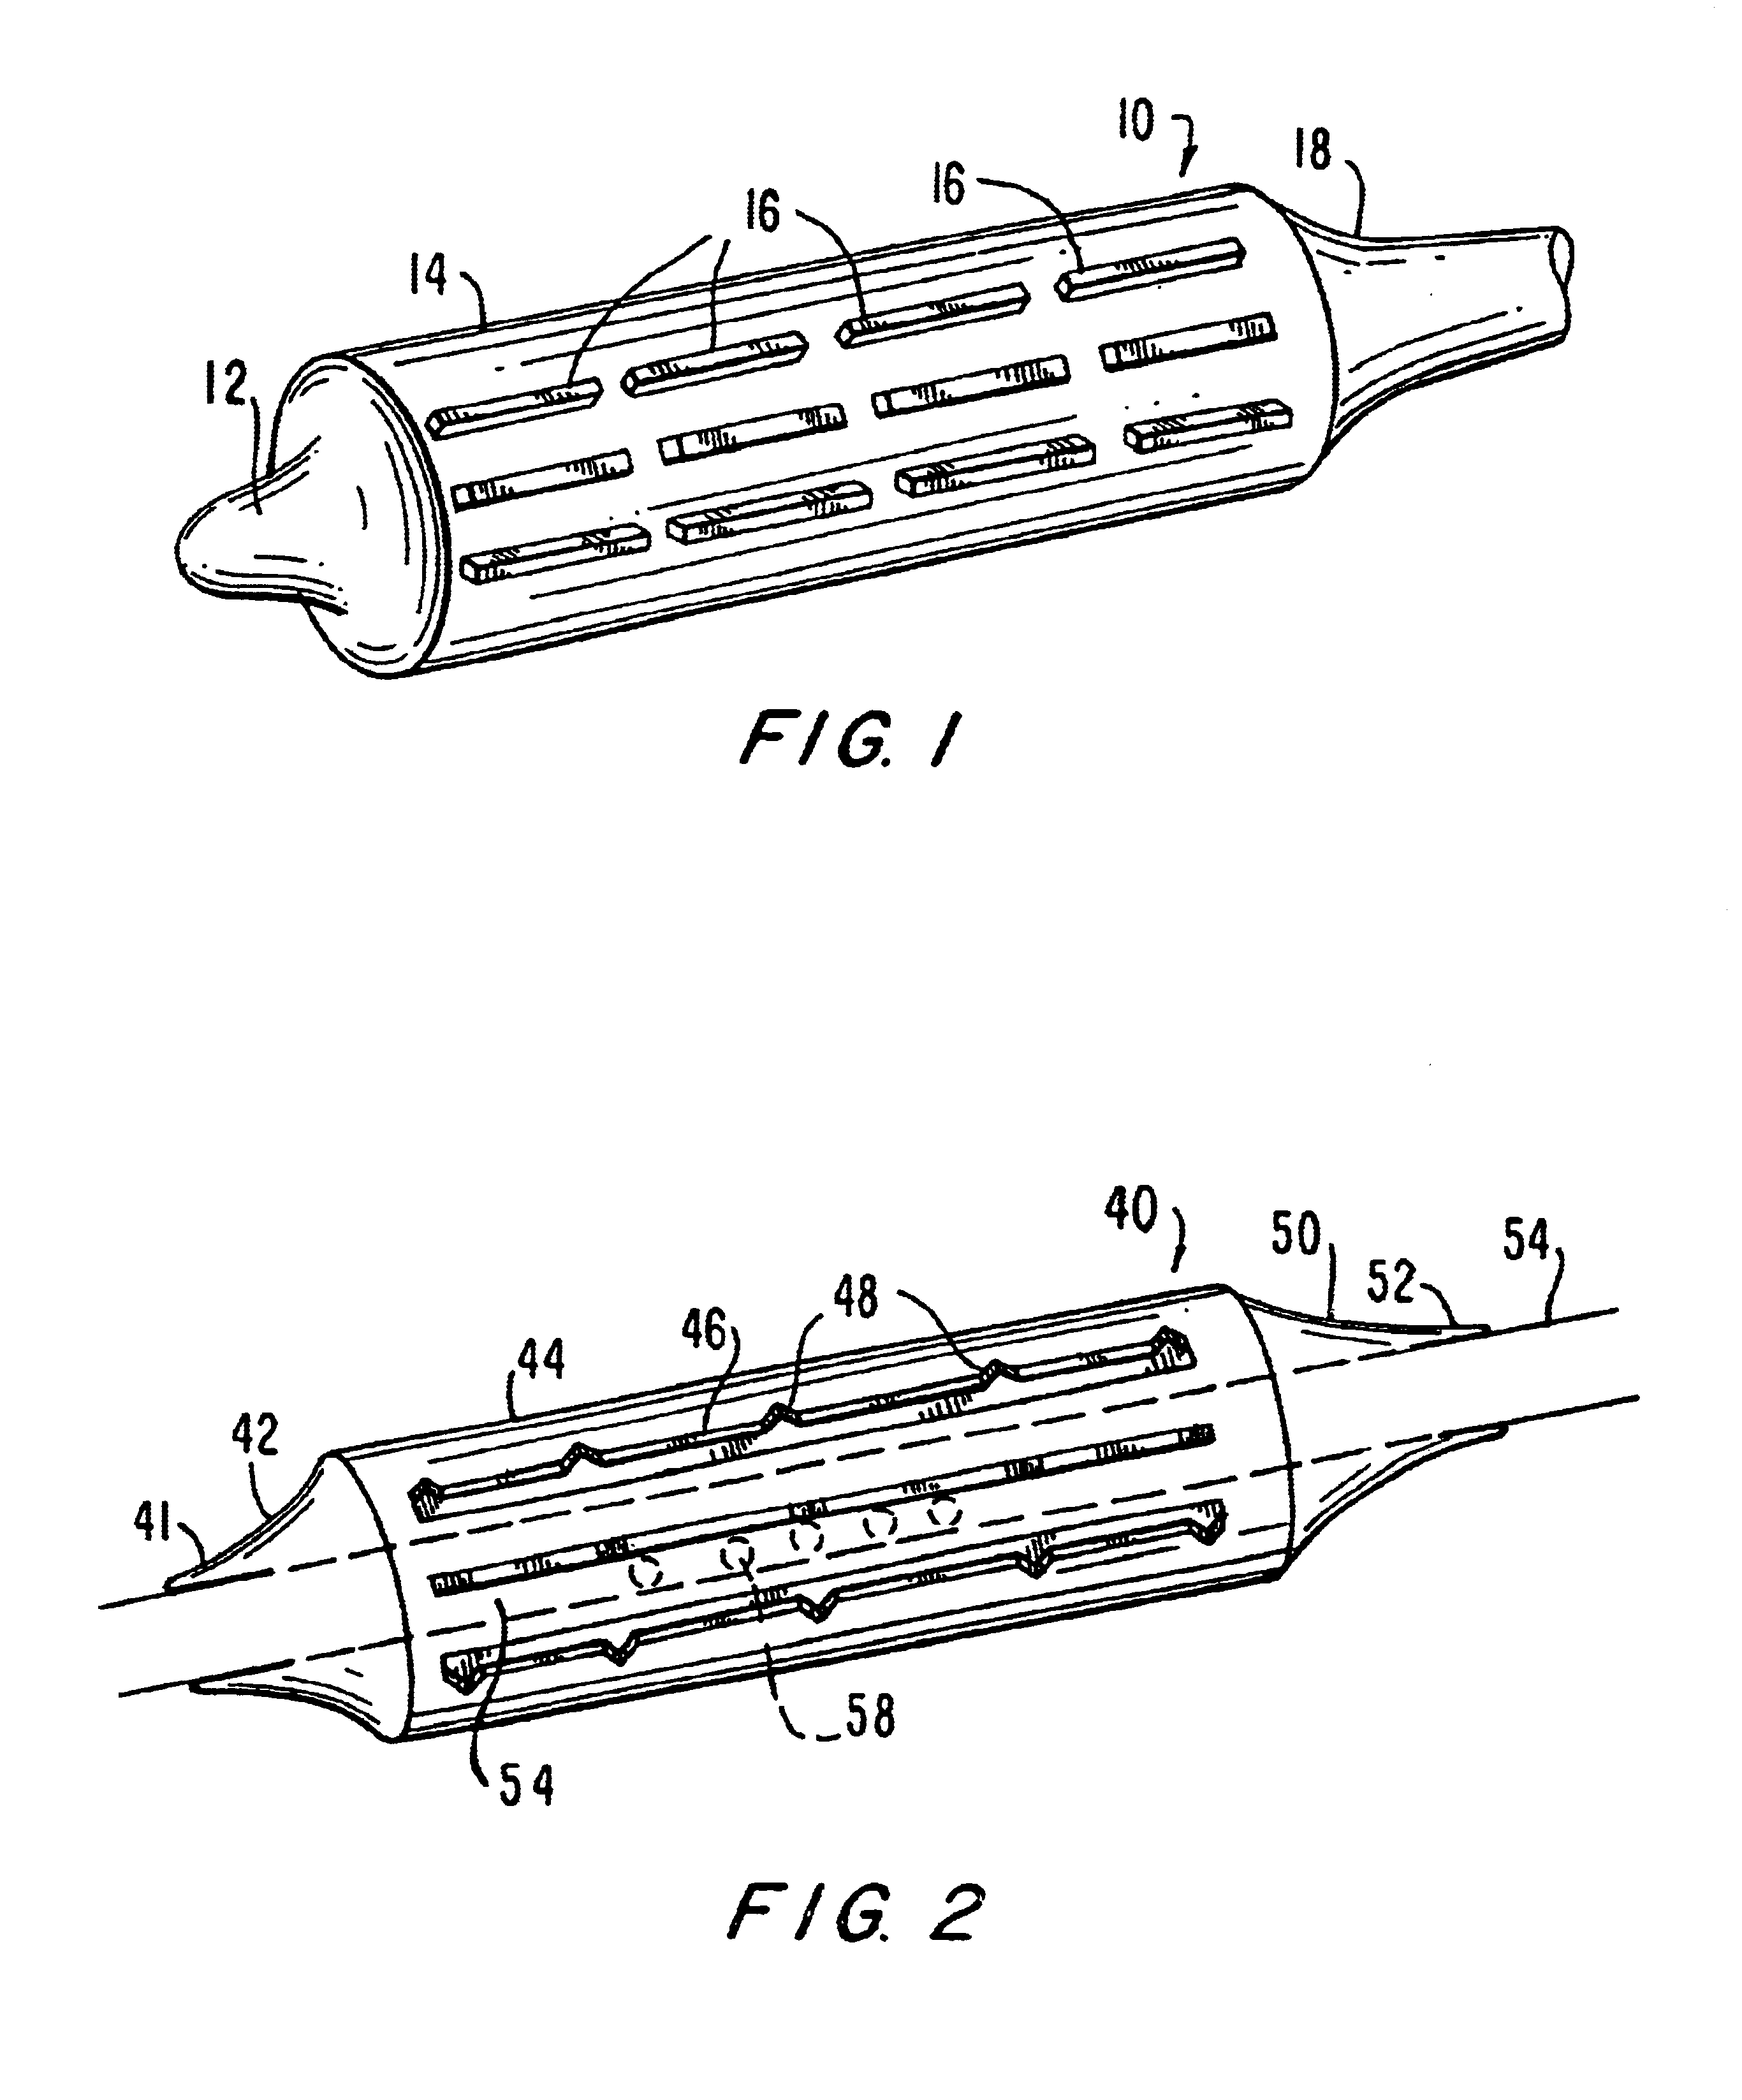 Stiffened balloon catheter for dilatation and stenting